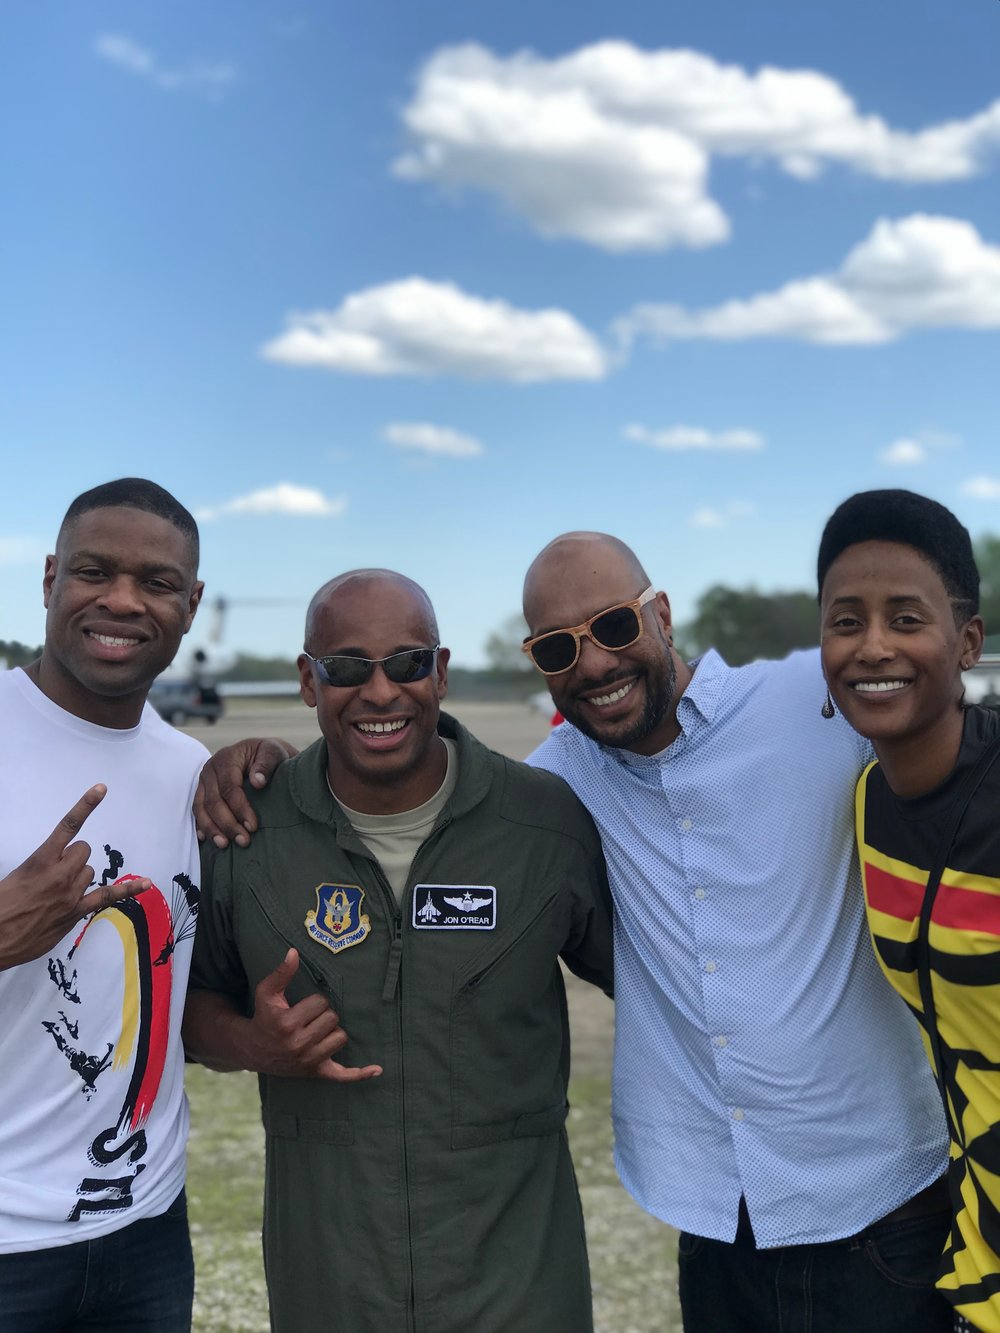  Emanuel Brice, Lieutenant Jonathan O’Rear, Waz Choudhry and Danielle Williams pose for a photo at Moton Field in Tuskegee, AL.  